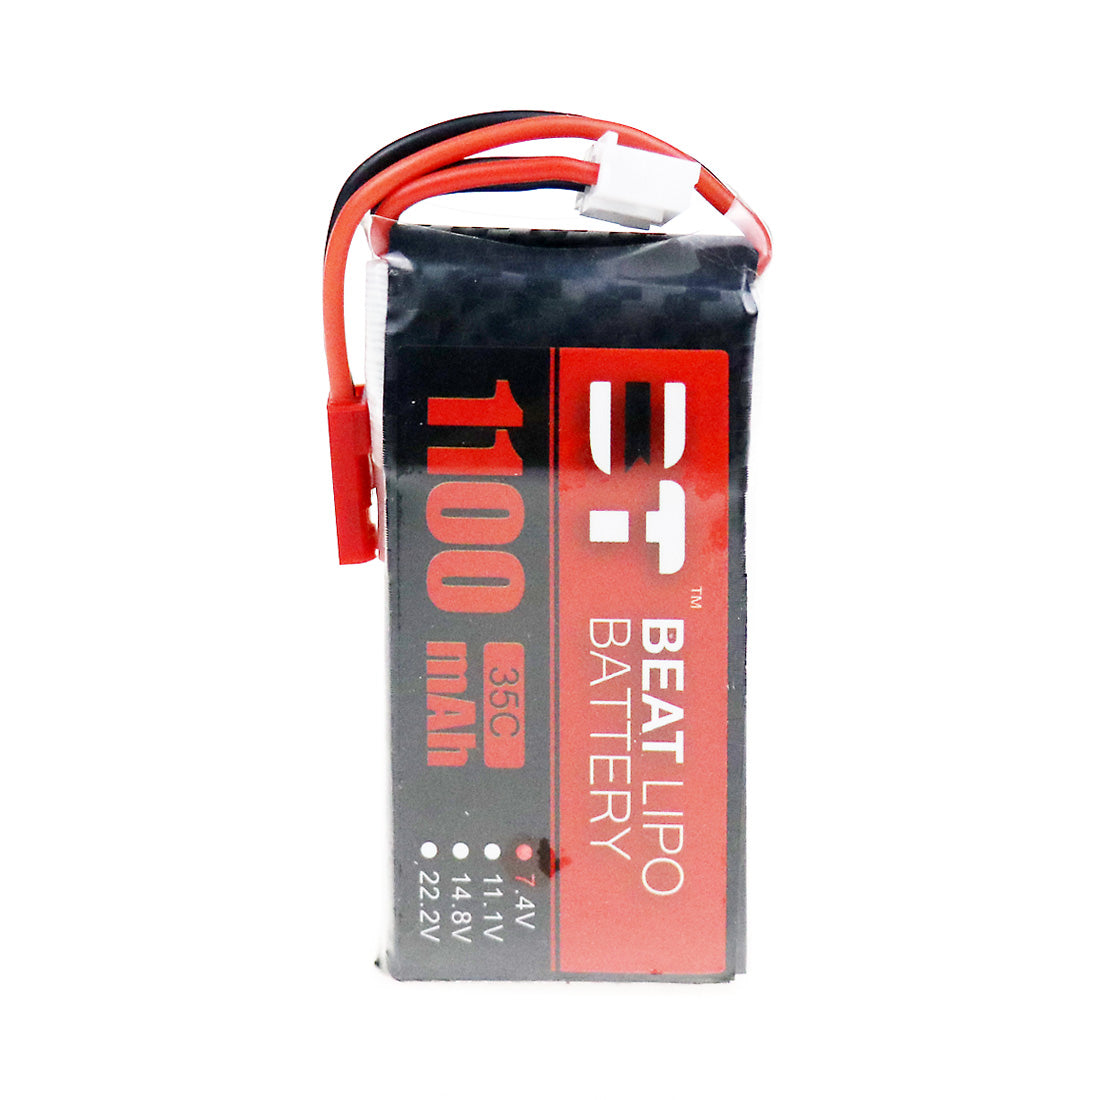 Light Coral BT BEAT 7.4V 1100mAh 35C 2S Lipo Battery JST Plug for Wltoys A979 RC Car Hubsan H109S RC Racing Drone